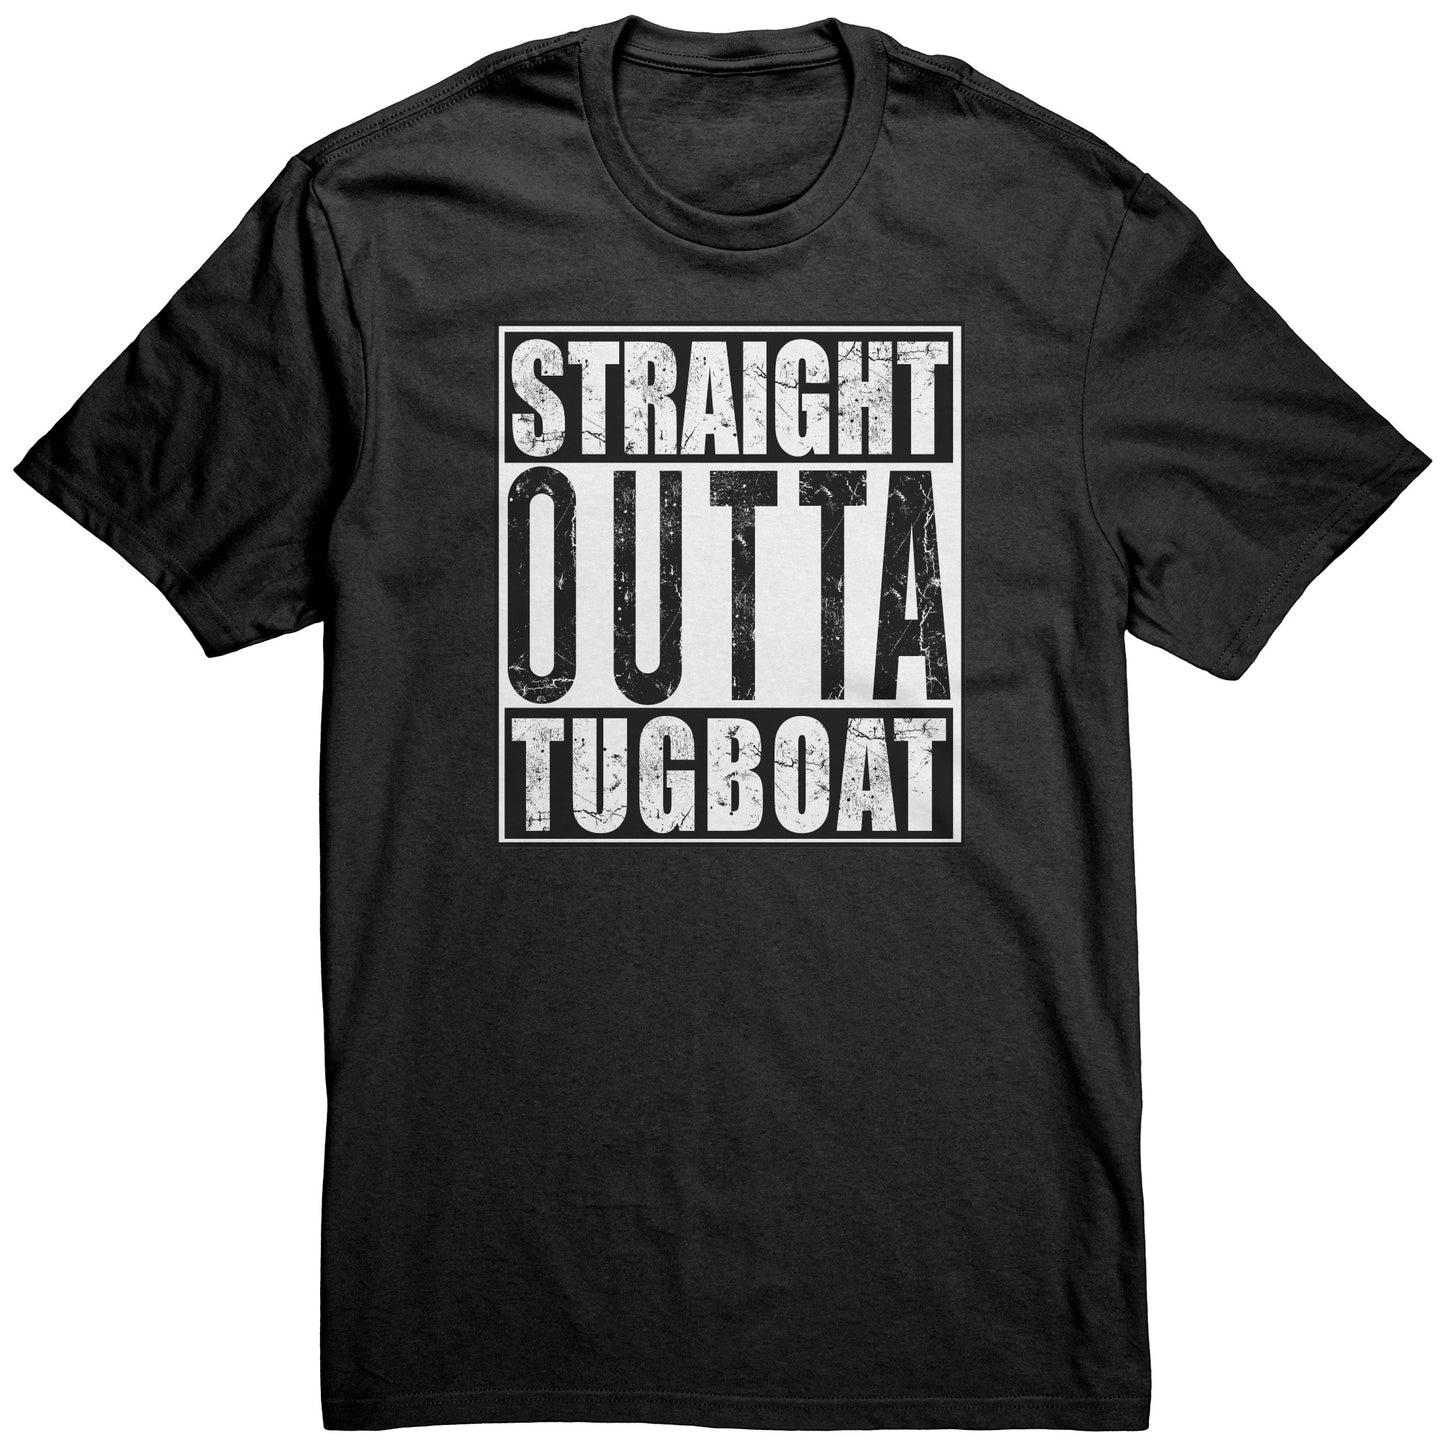 Straight Outta Tugboat T-Shirt